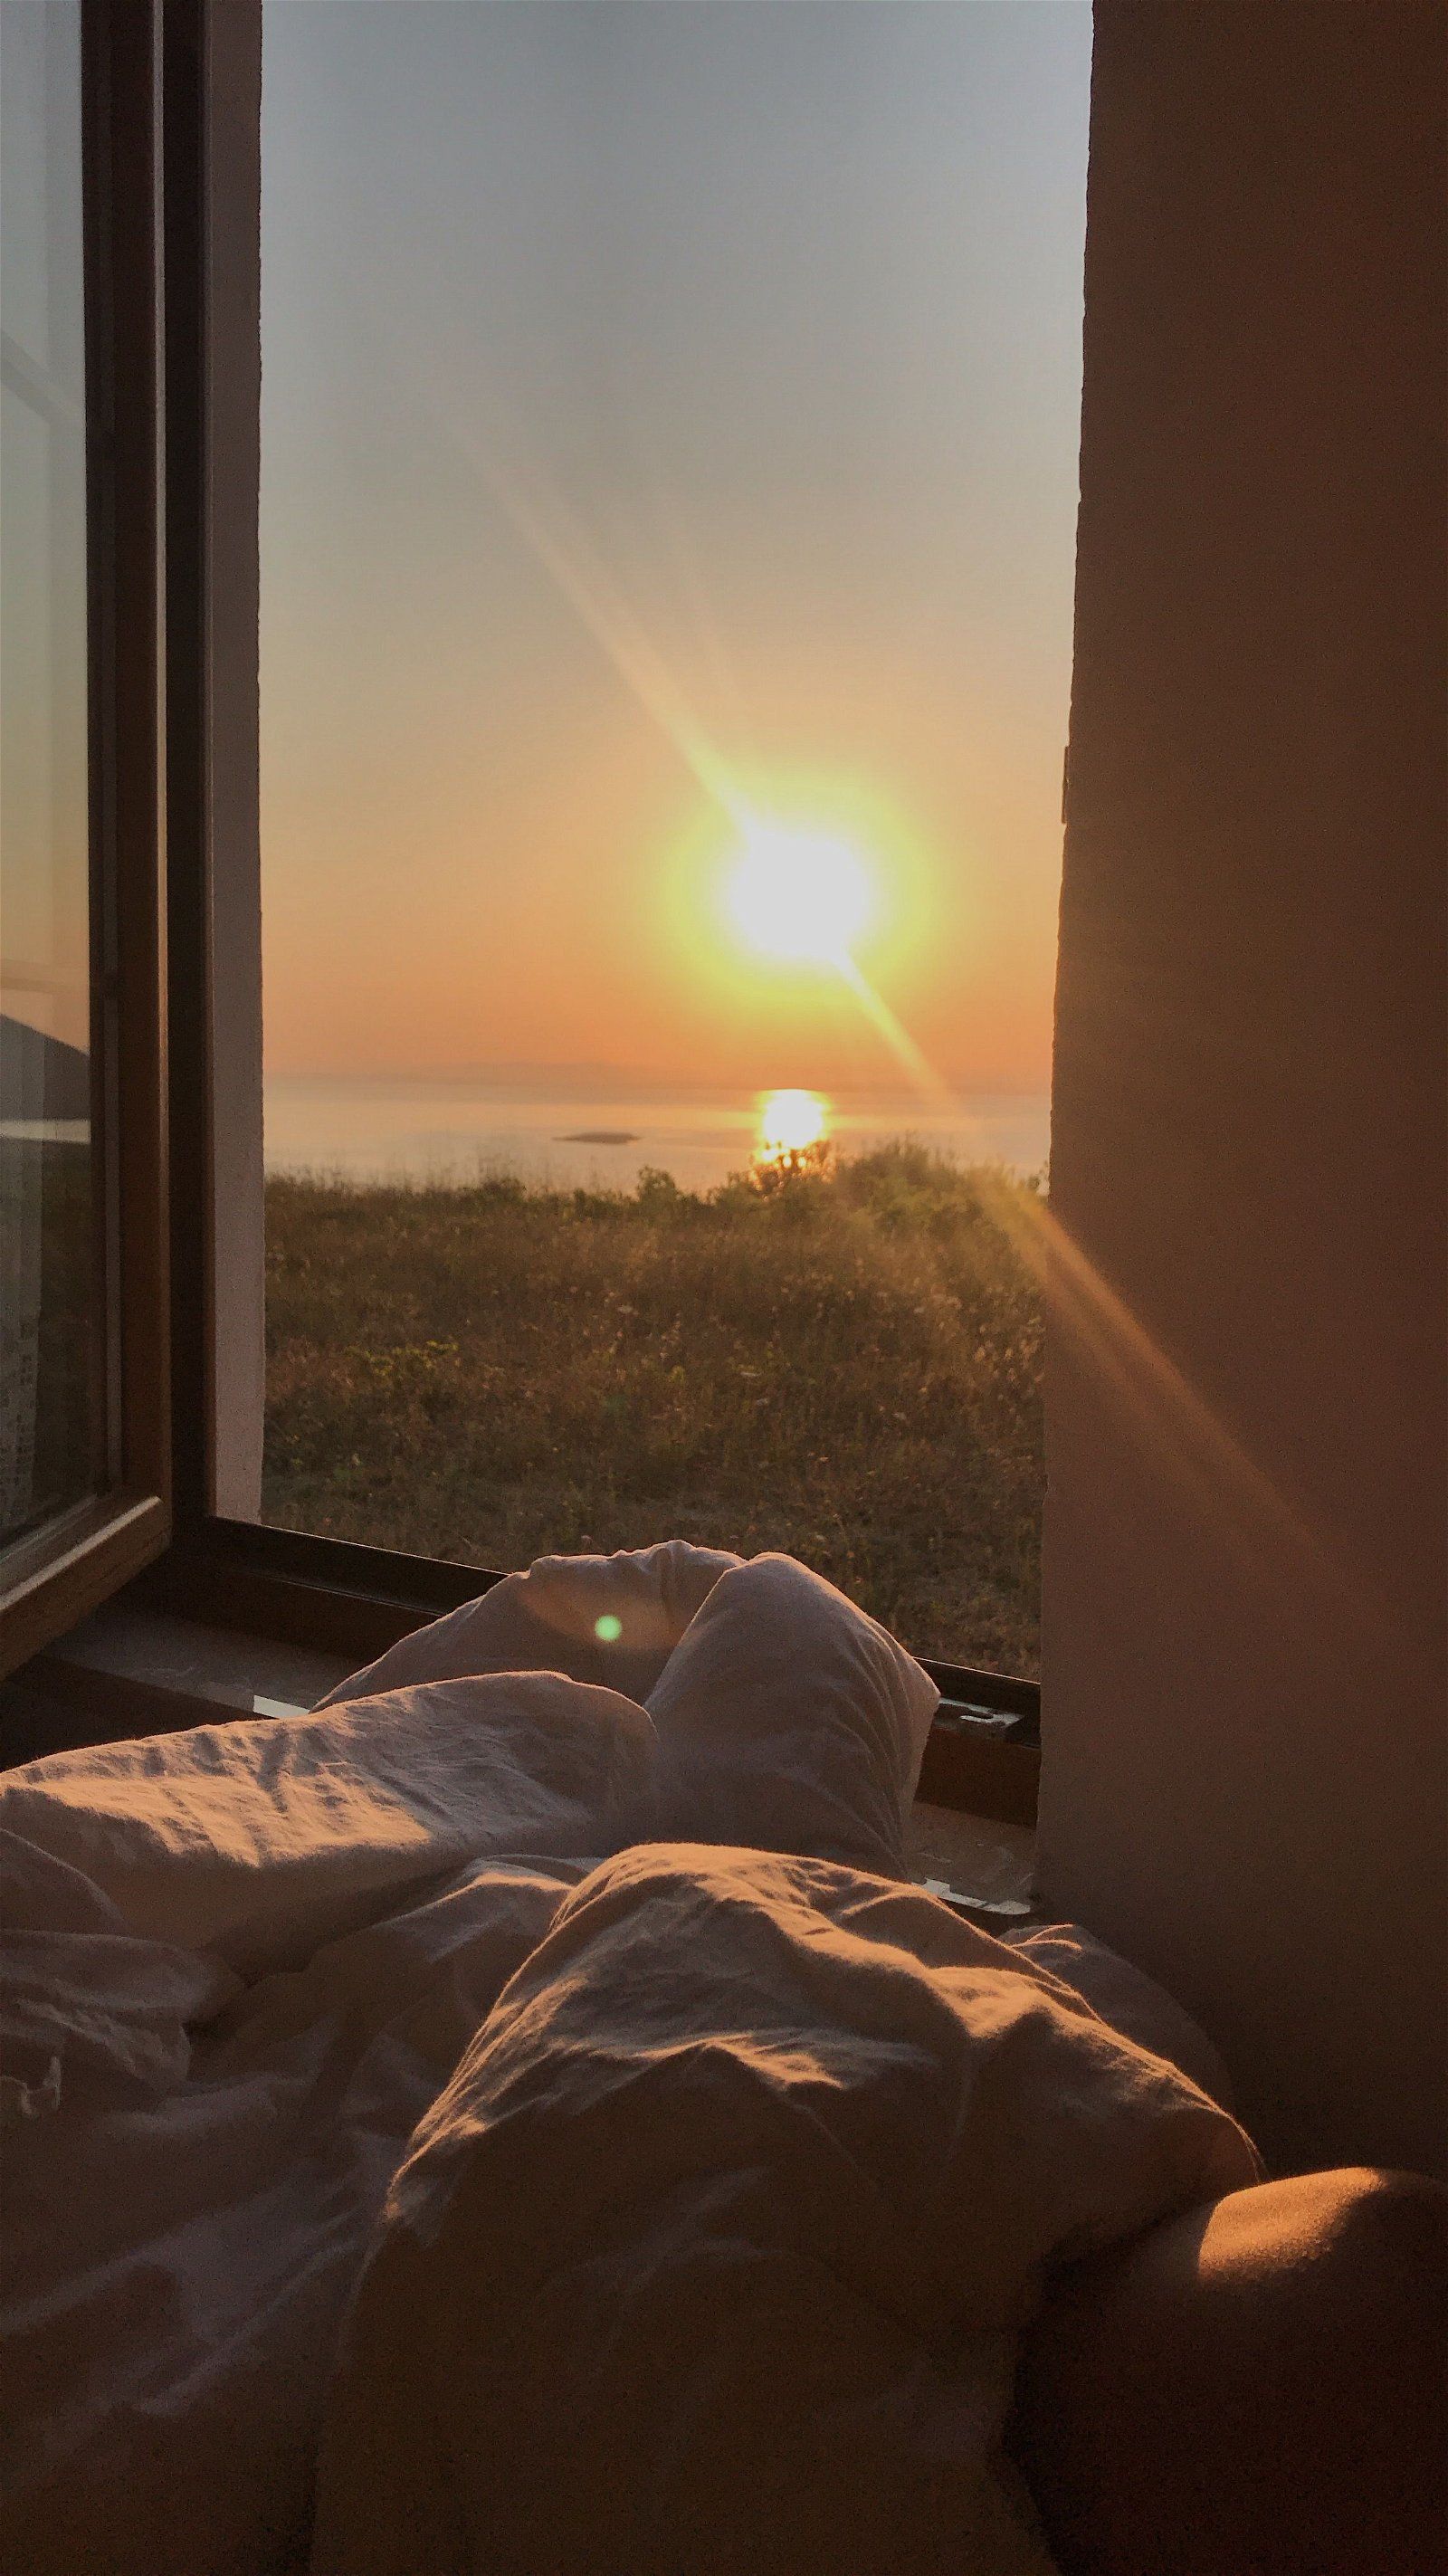 A view of the sun setting over the ocean from a bed. - Sunshine